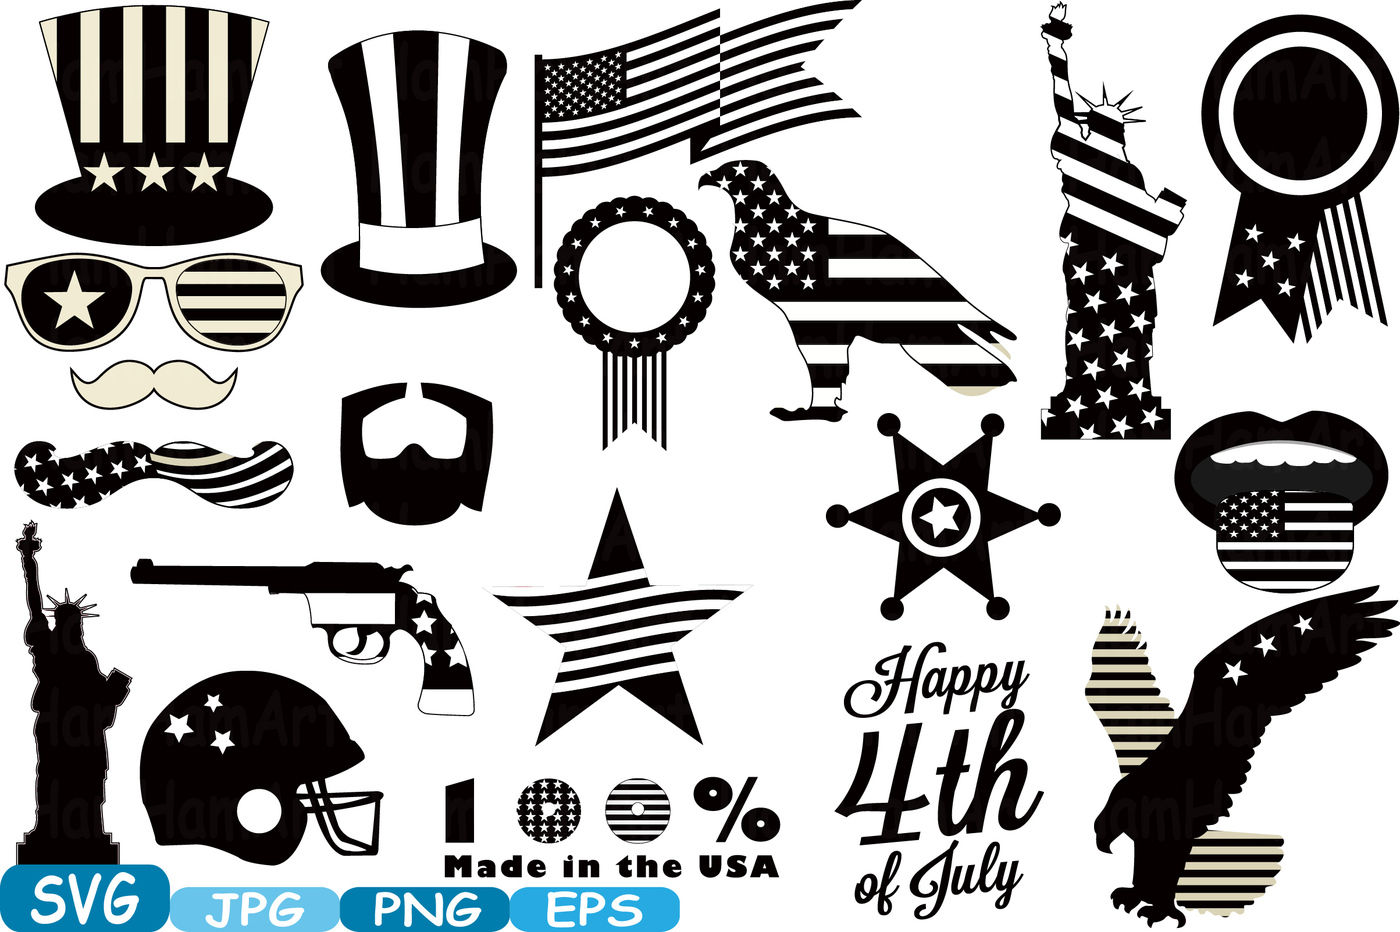 ori 59380 038ffcf6b7e0beb9ba86f341afec6486c2490186 4th of july party photo booth prop silhouette cameo cutting files svg stickers clipart face clip art digital graphics commercial use 283s